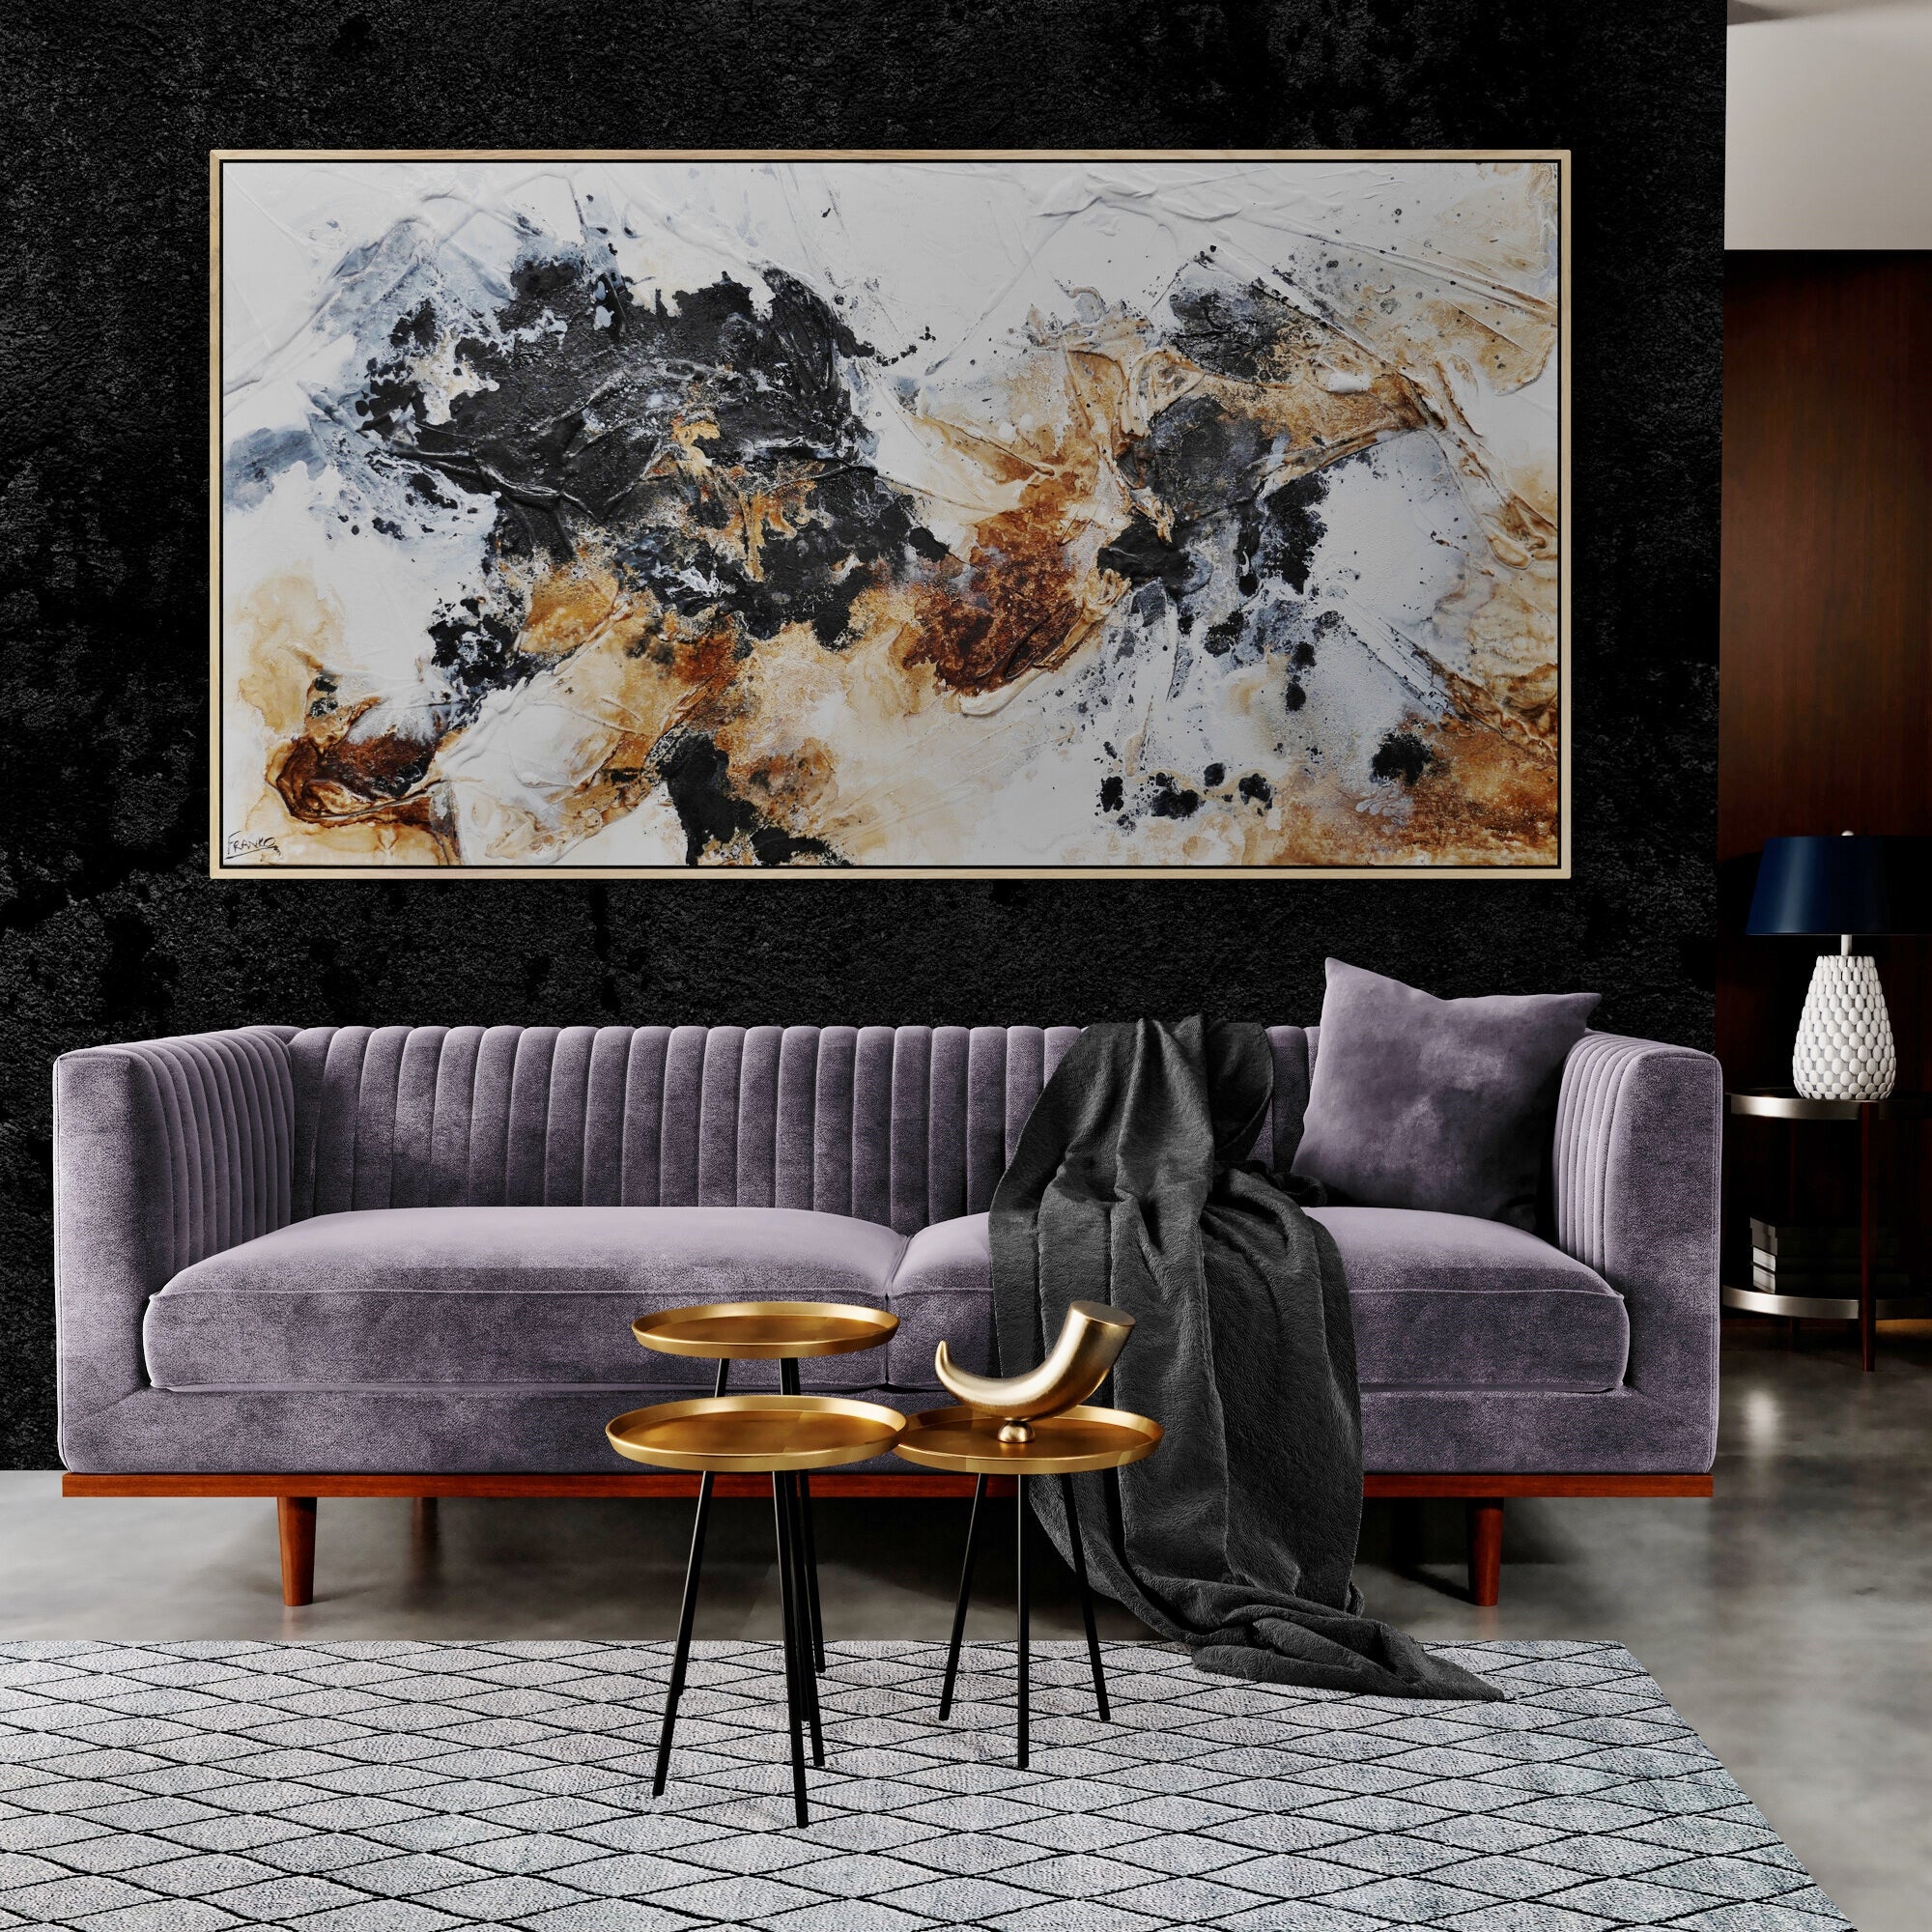 Lunar 190cm x 100cm Rusts Blacks Slates White Textured Abstract Painting (SOLD)